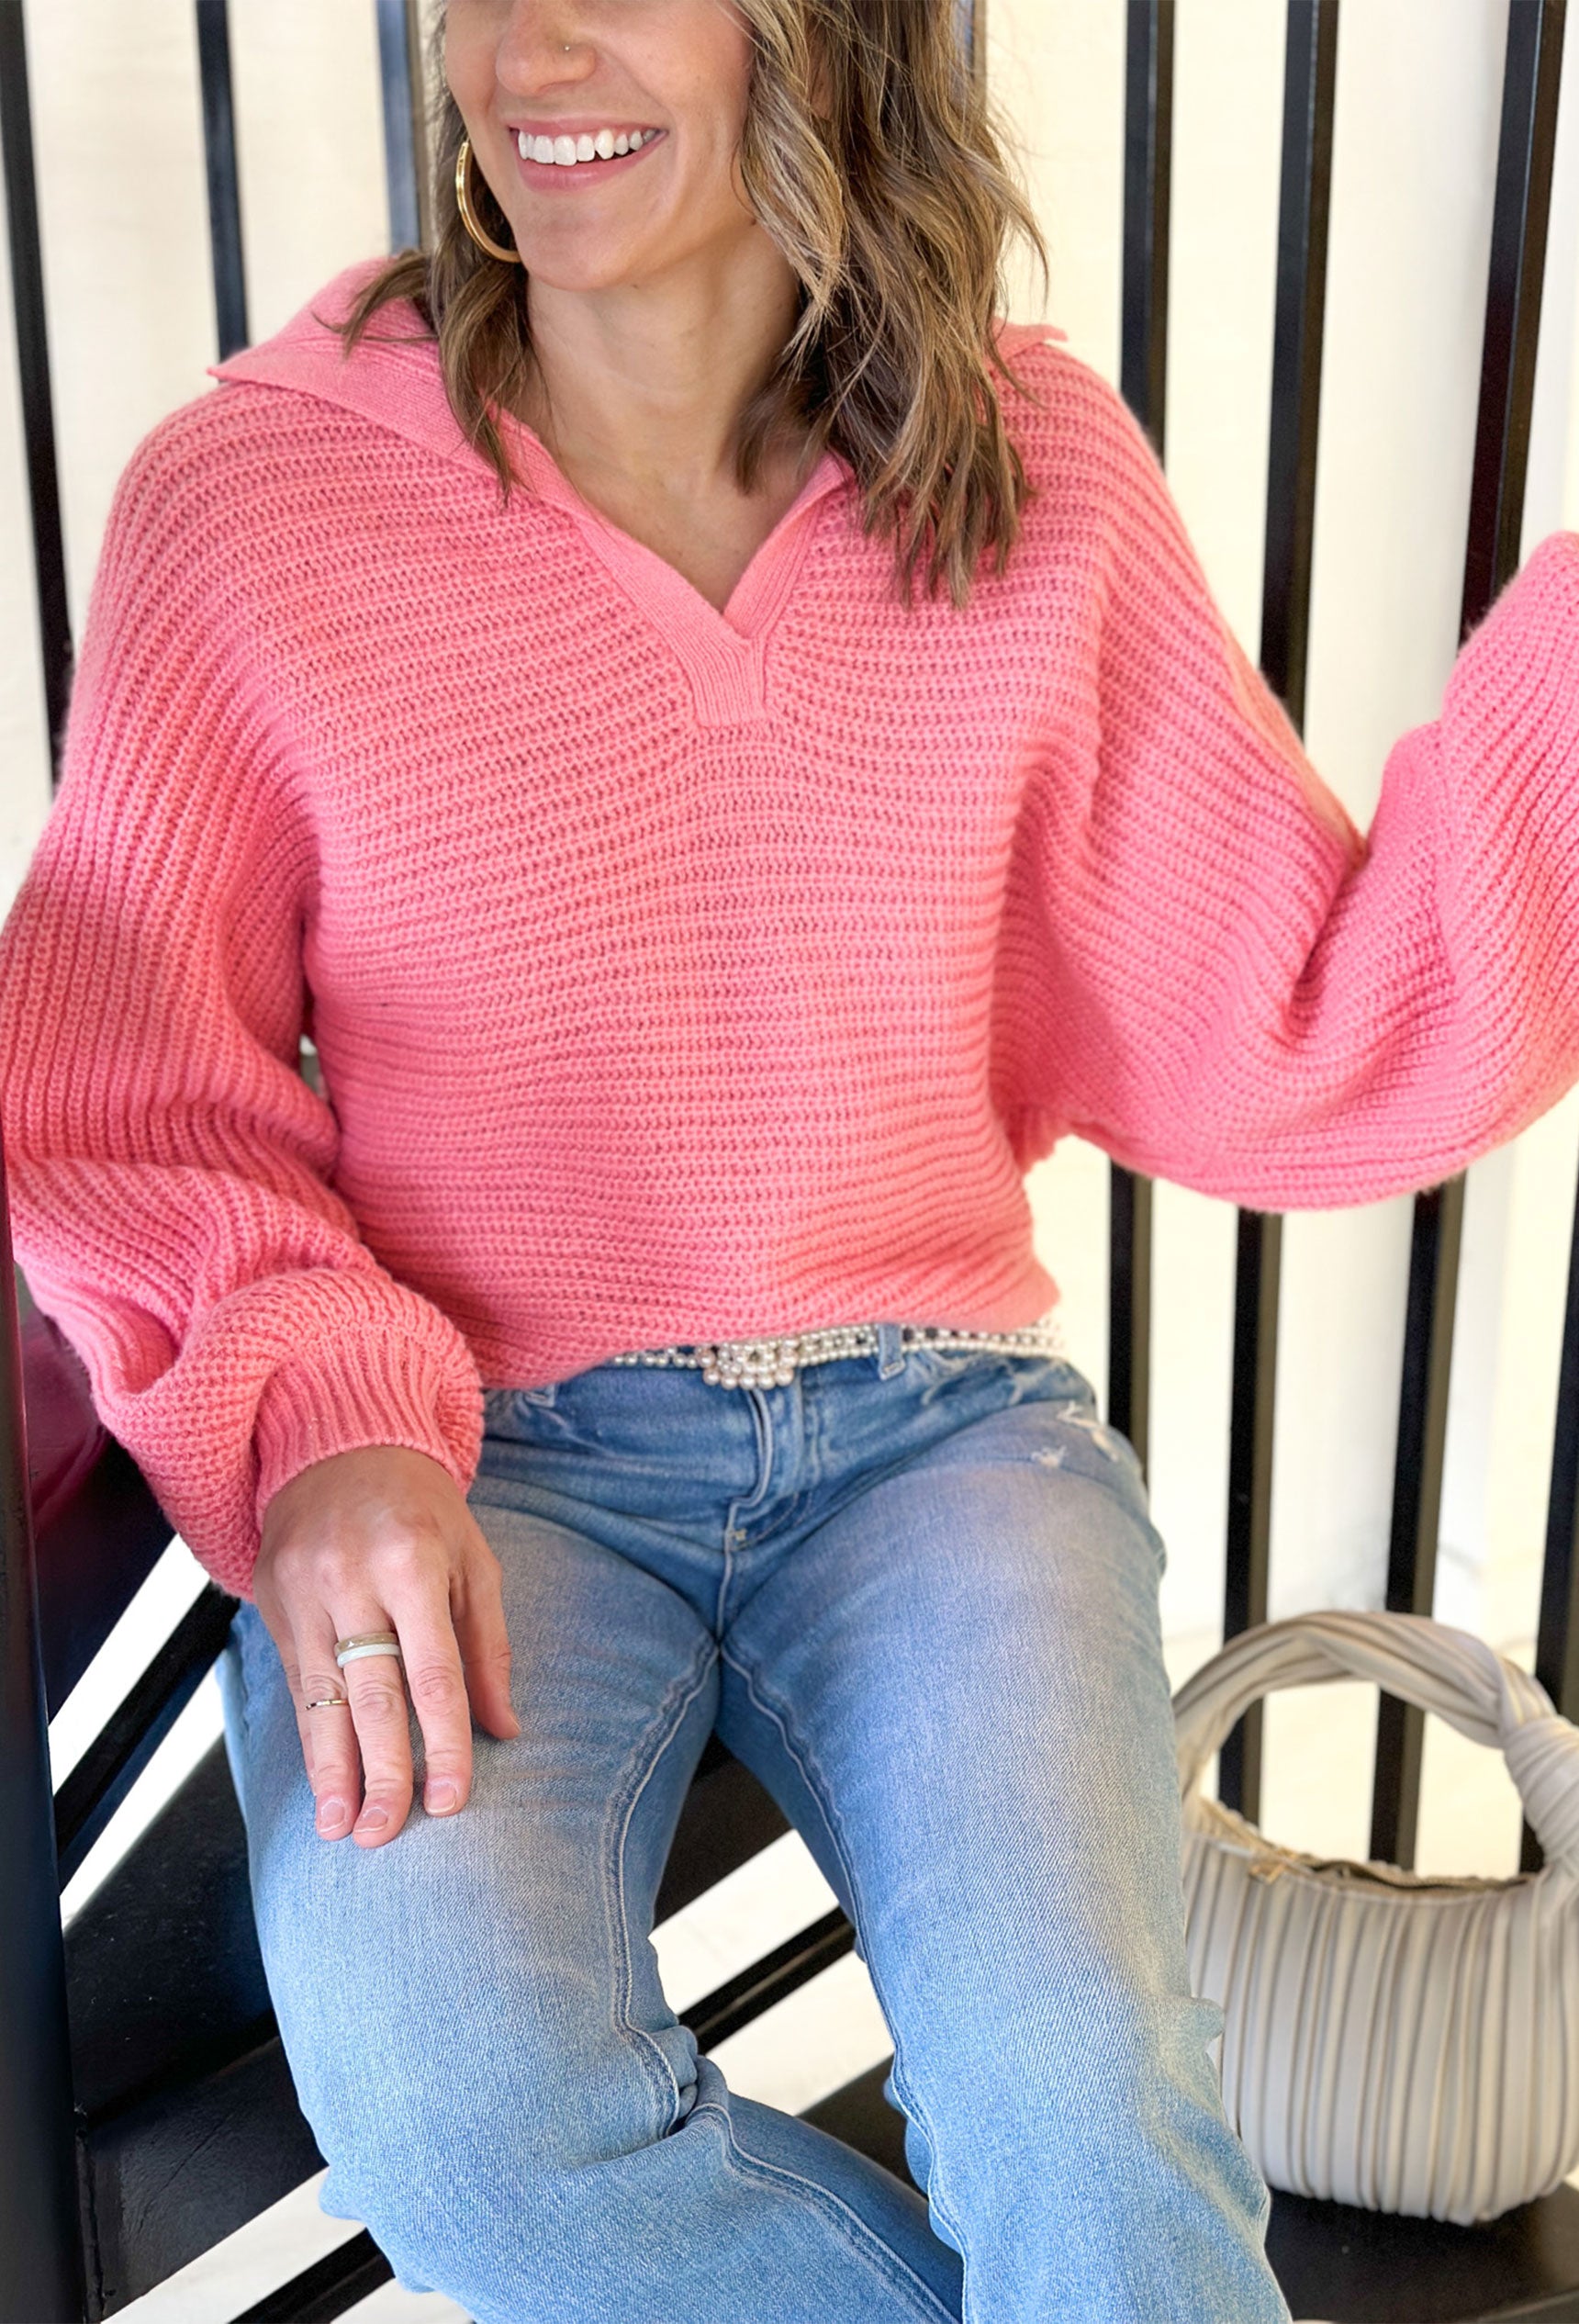 Heading East Knit Sweater, bubble gum pink knit sweater with collar